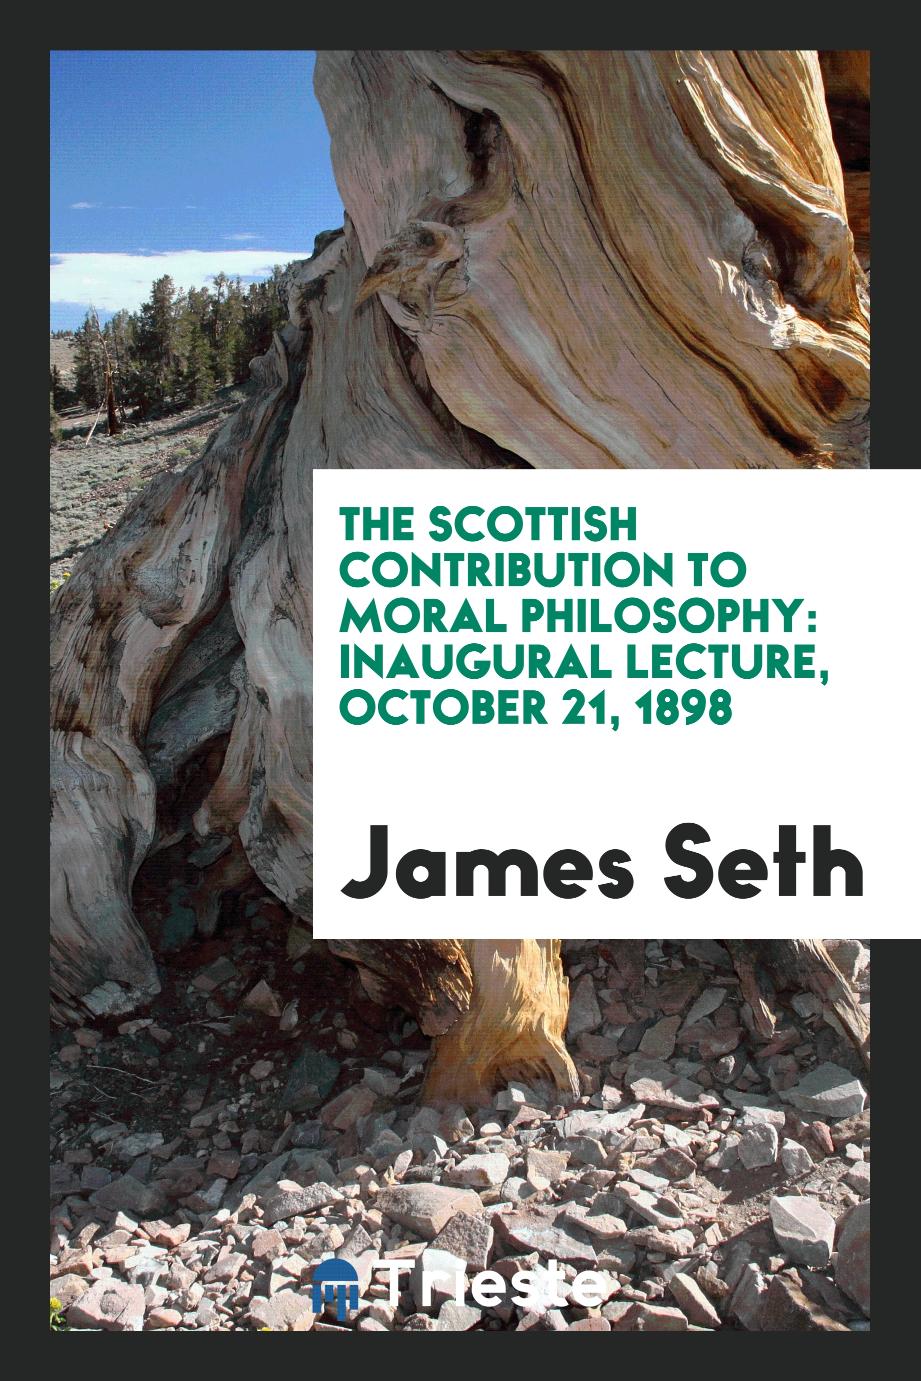 The Scottish contribution to moral philosophy: inaugural lecture, October 21, 1898